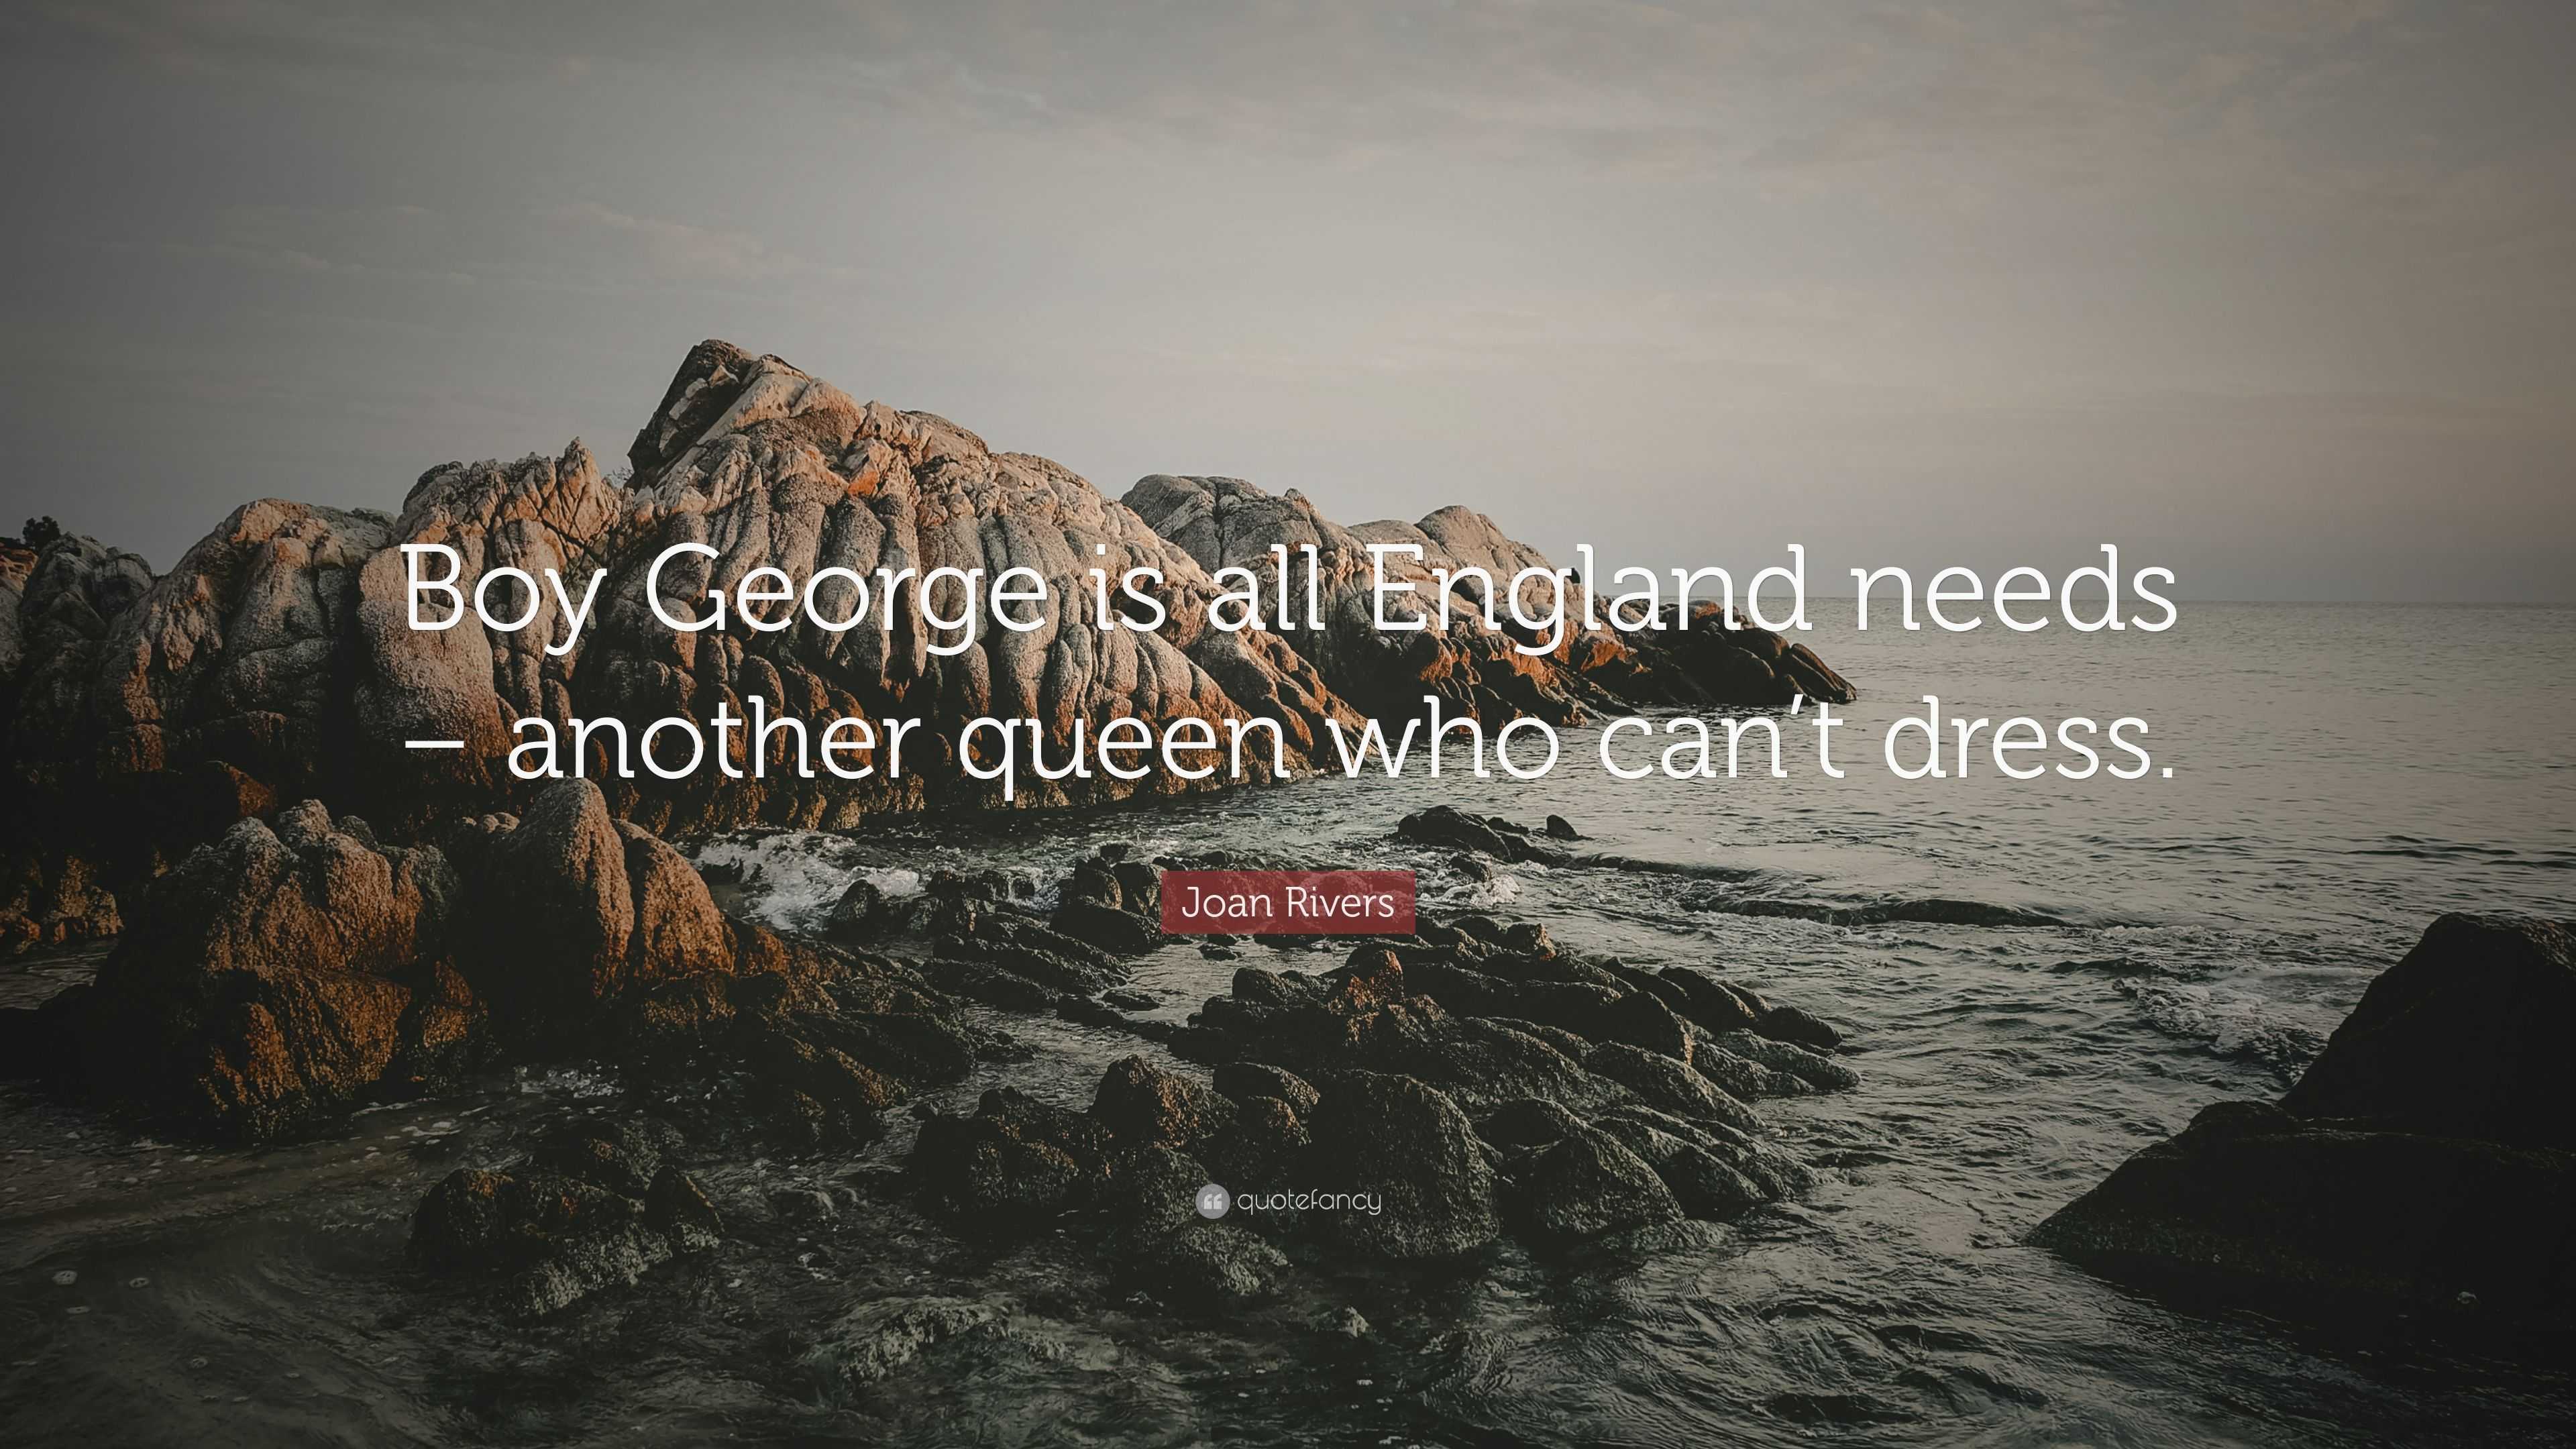 Rivers queen needs England can\'t “Boy another George Quote: Joan – is who all